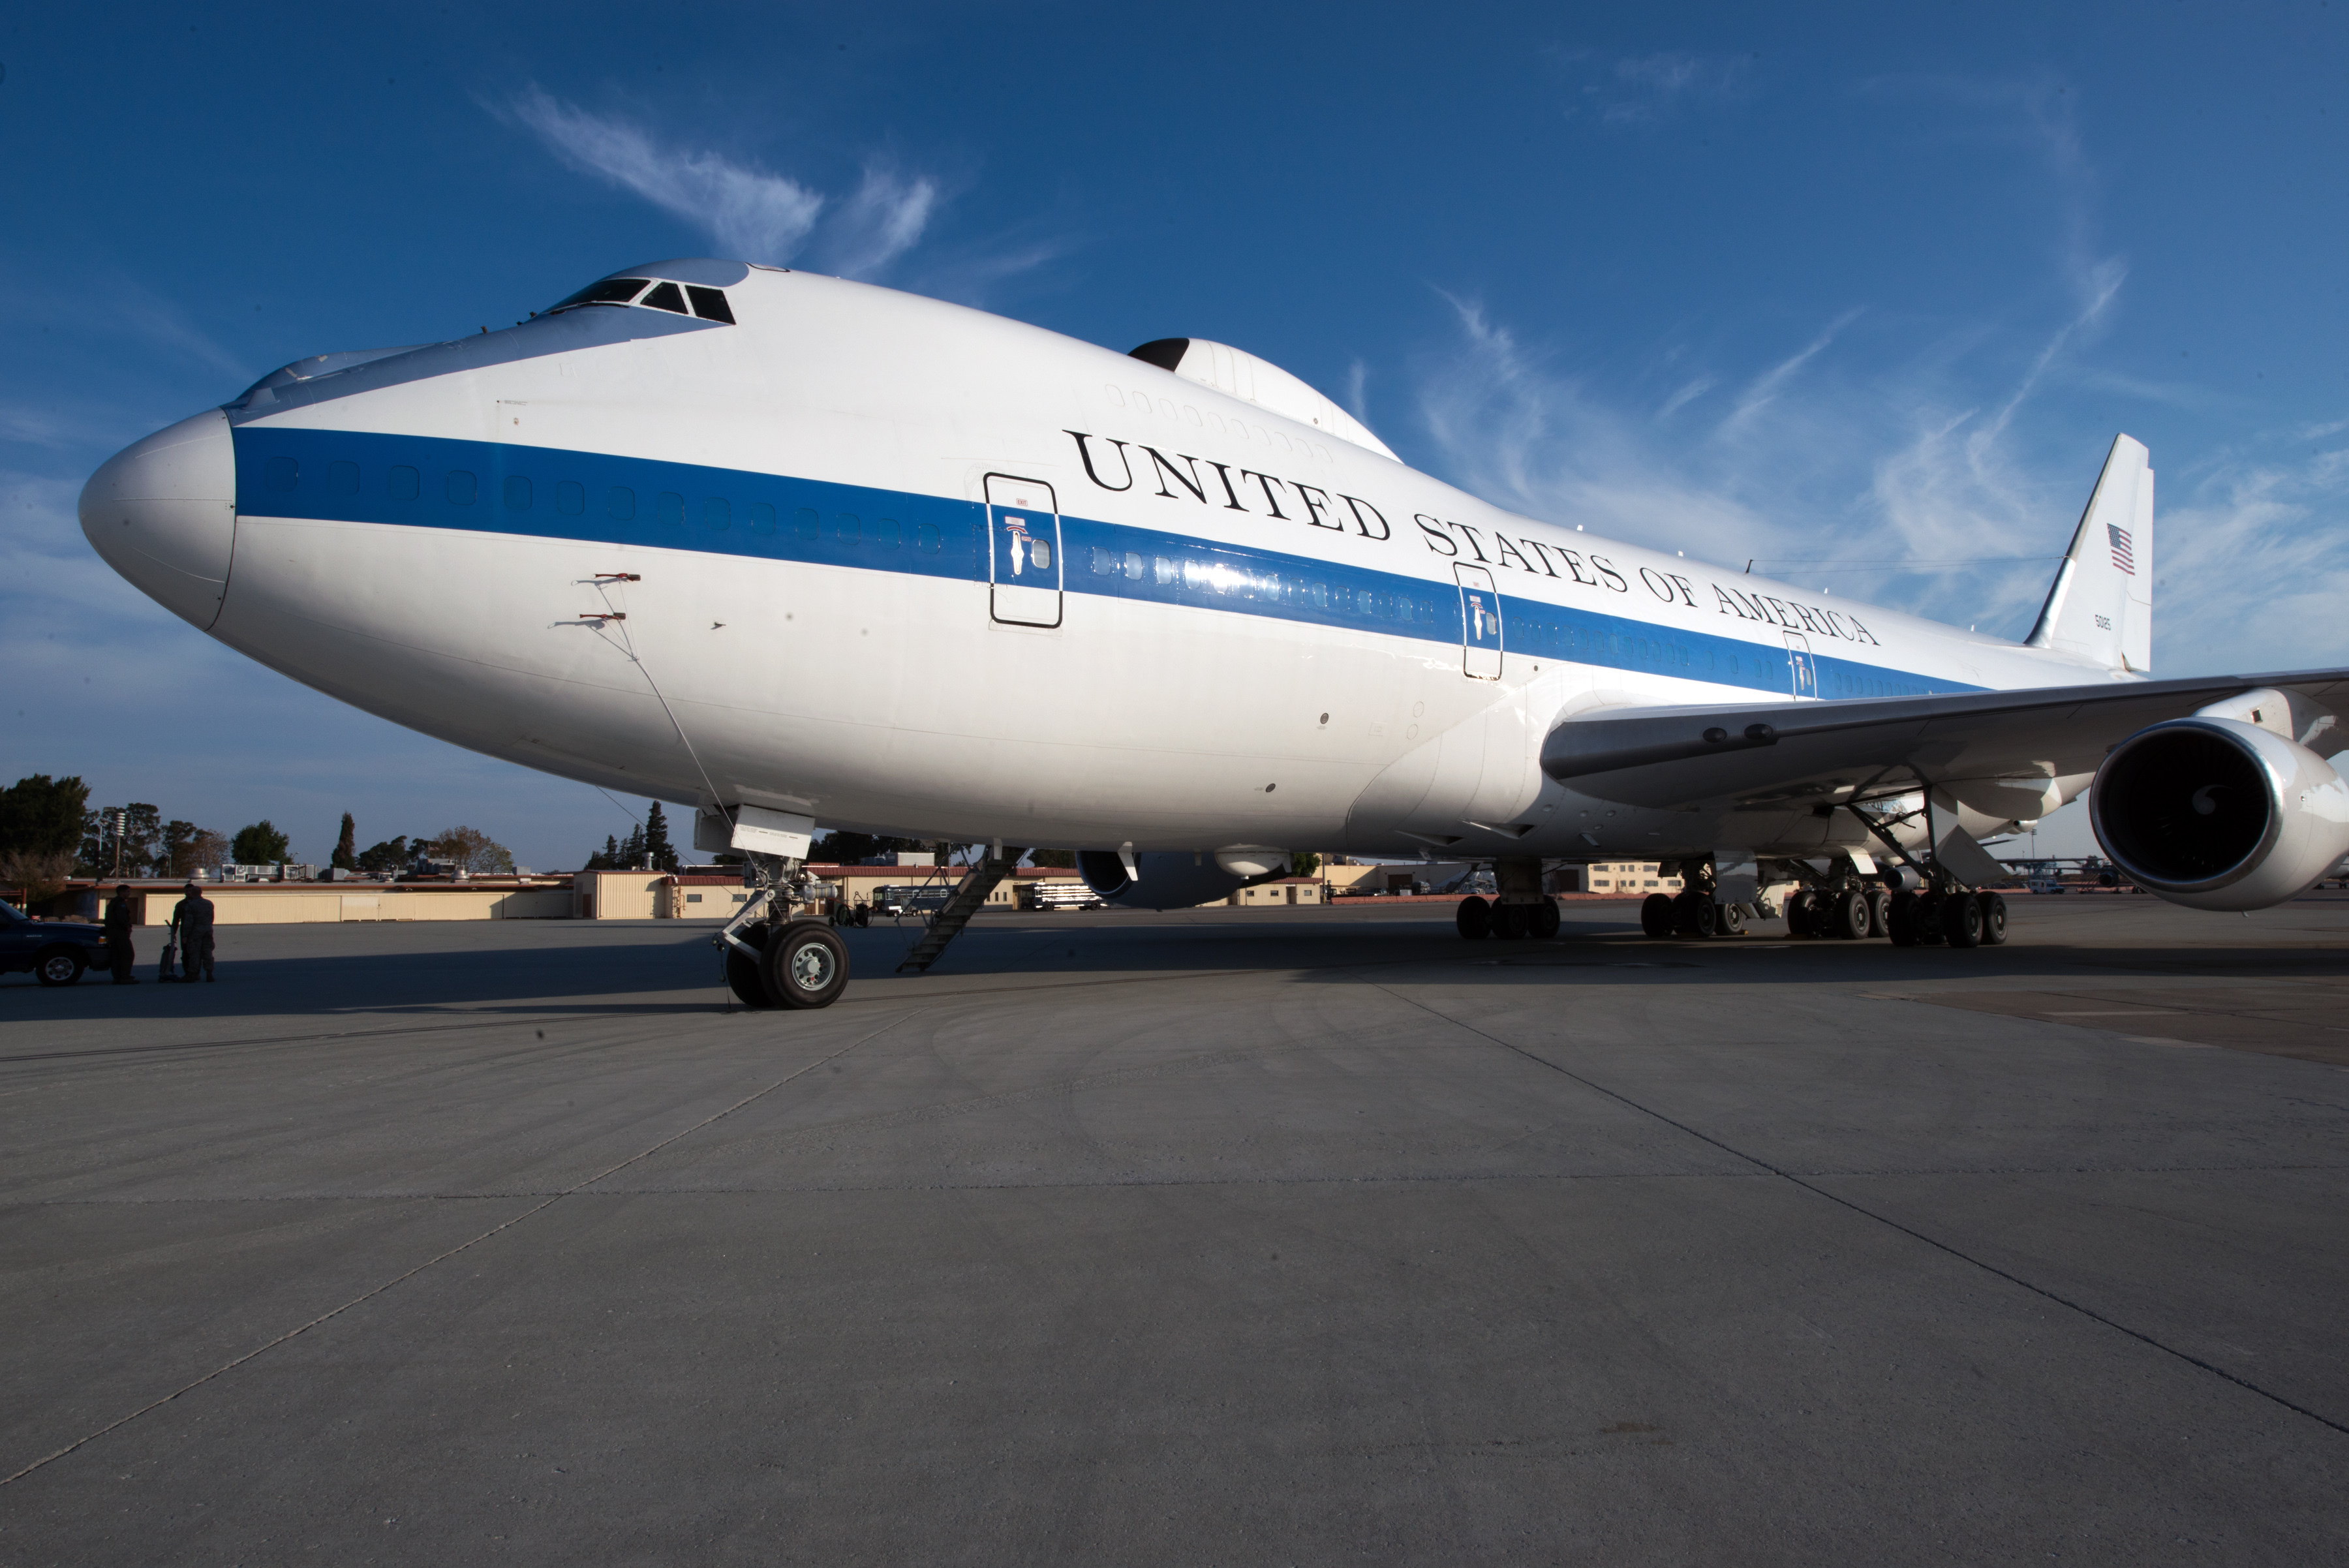 The Air off the start of its E-4B 'Doomsday Plane' replacement program